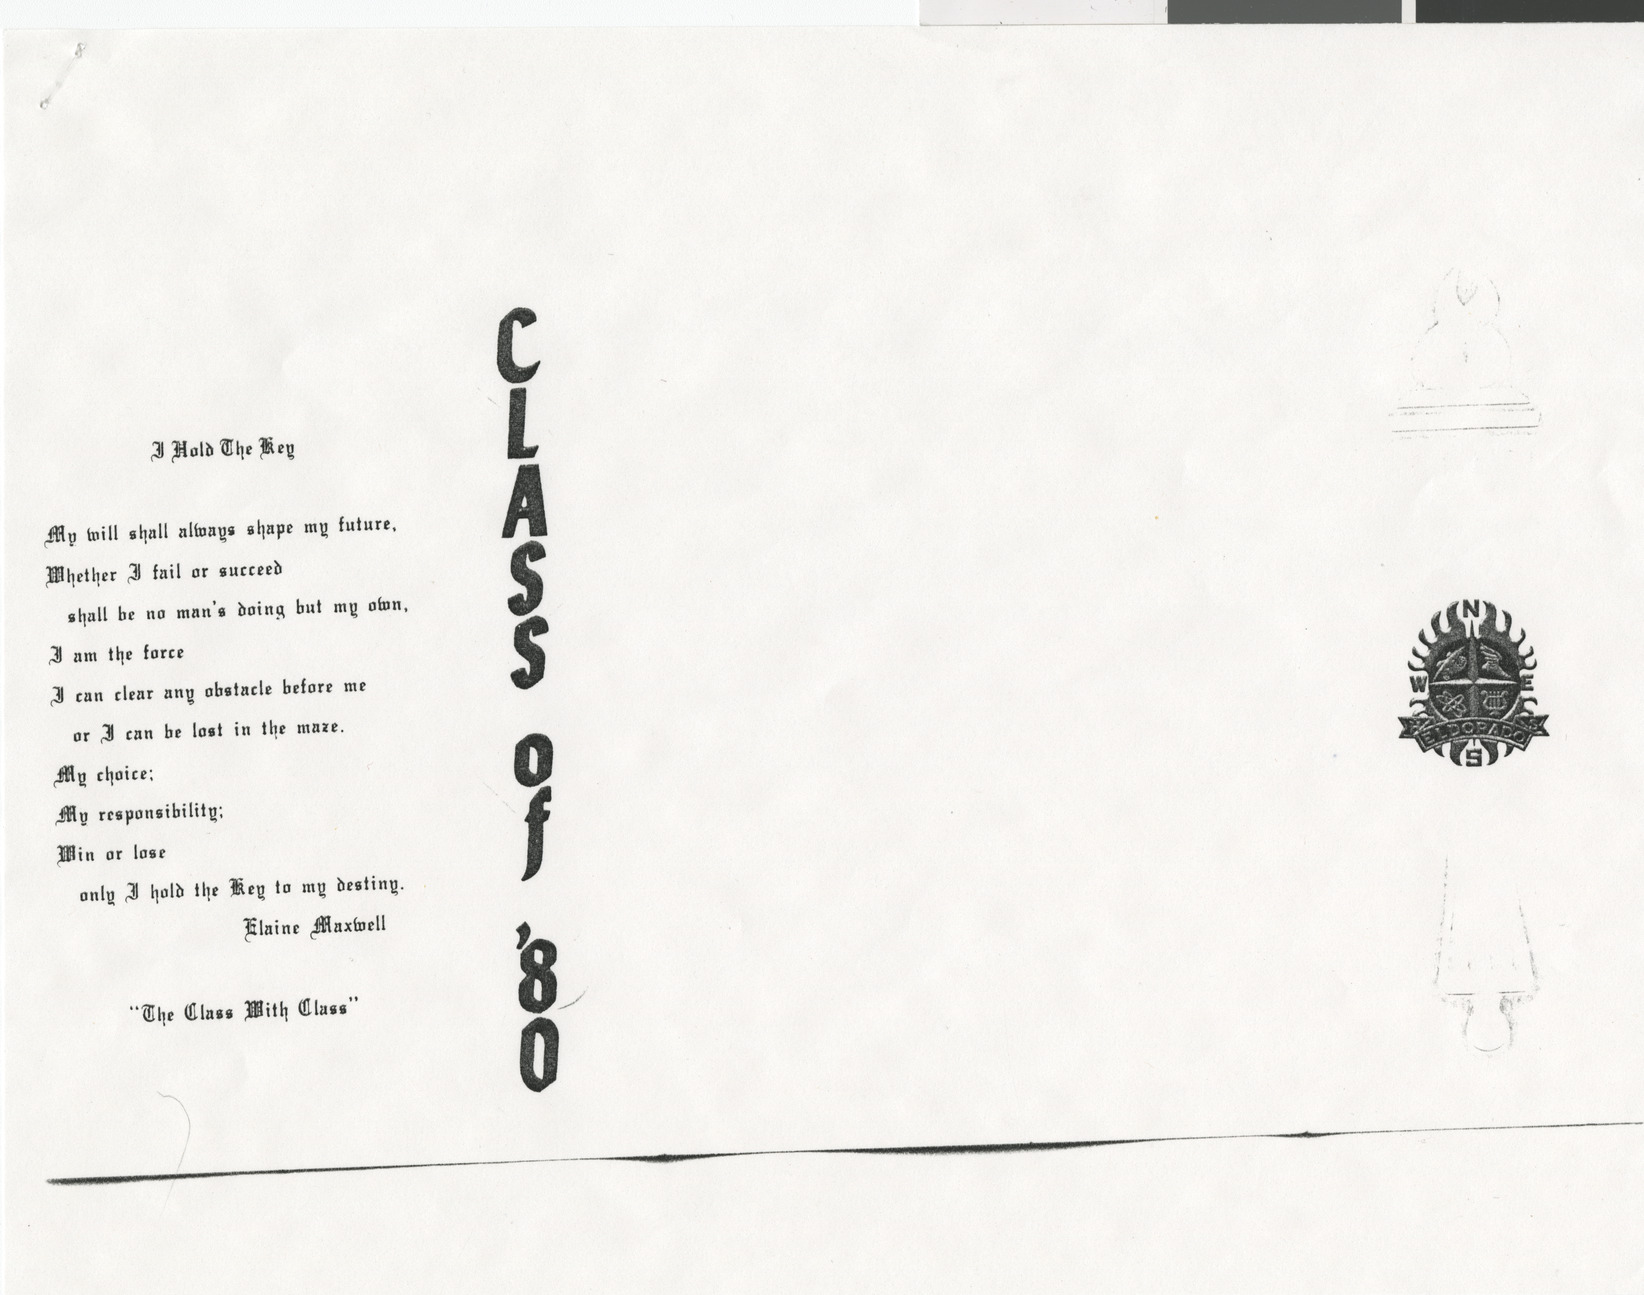 Photocopy of a graduation announcement for Anthony Charles Quarles from Eldorado High School, 1980